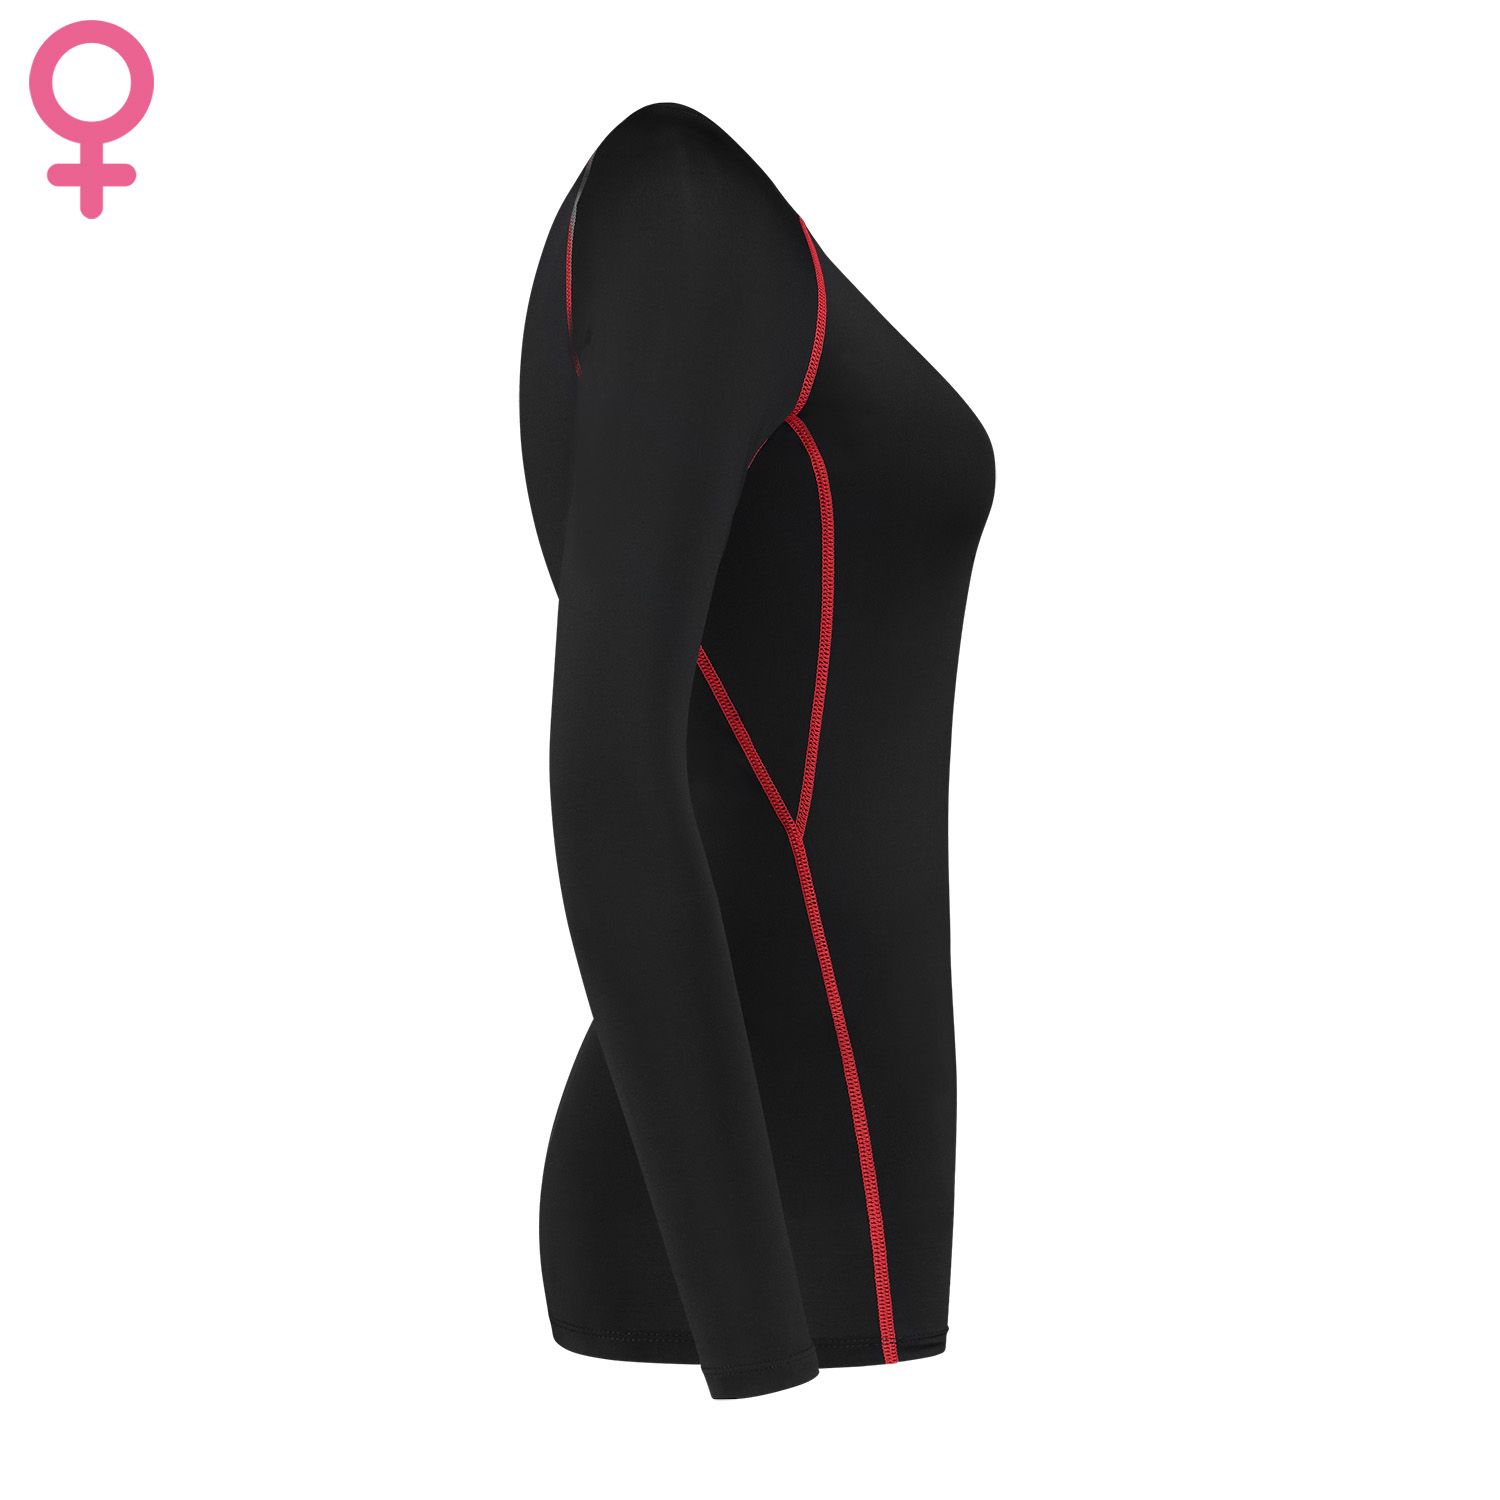 gladiator sports longsleeve compression top for woman side